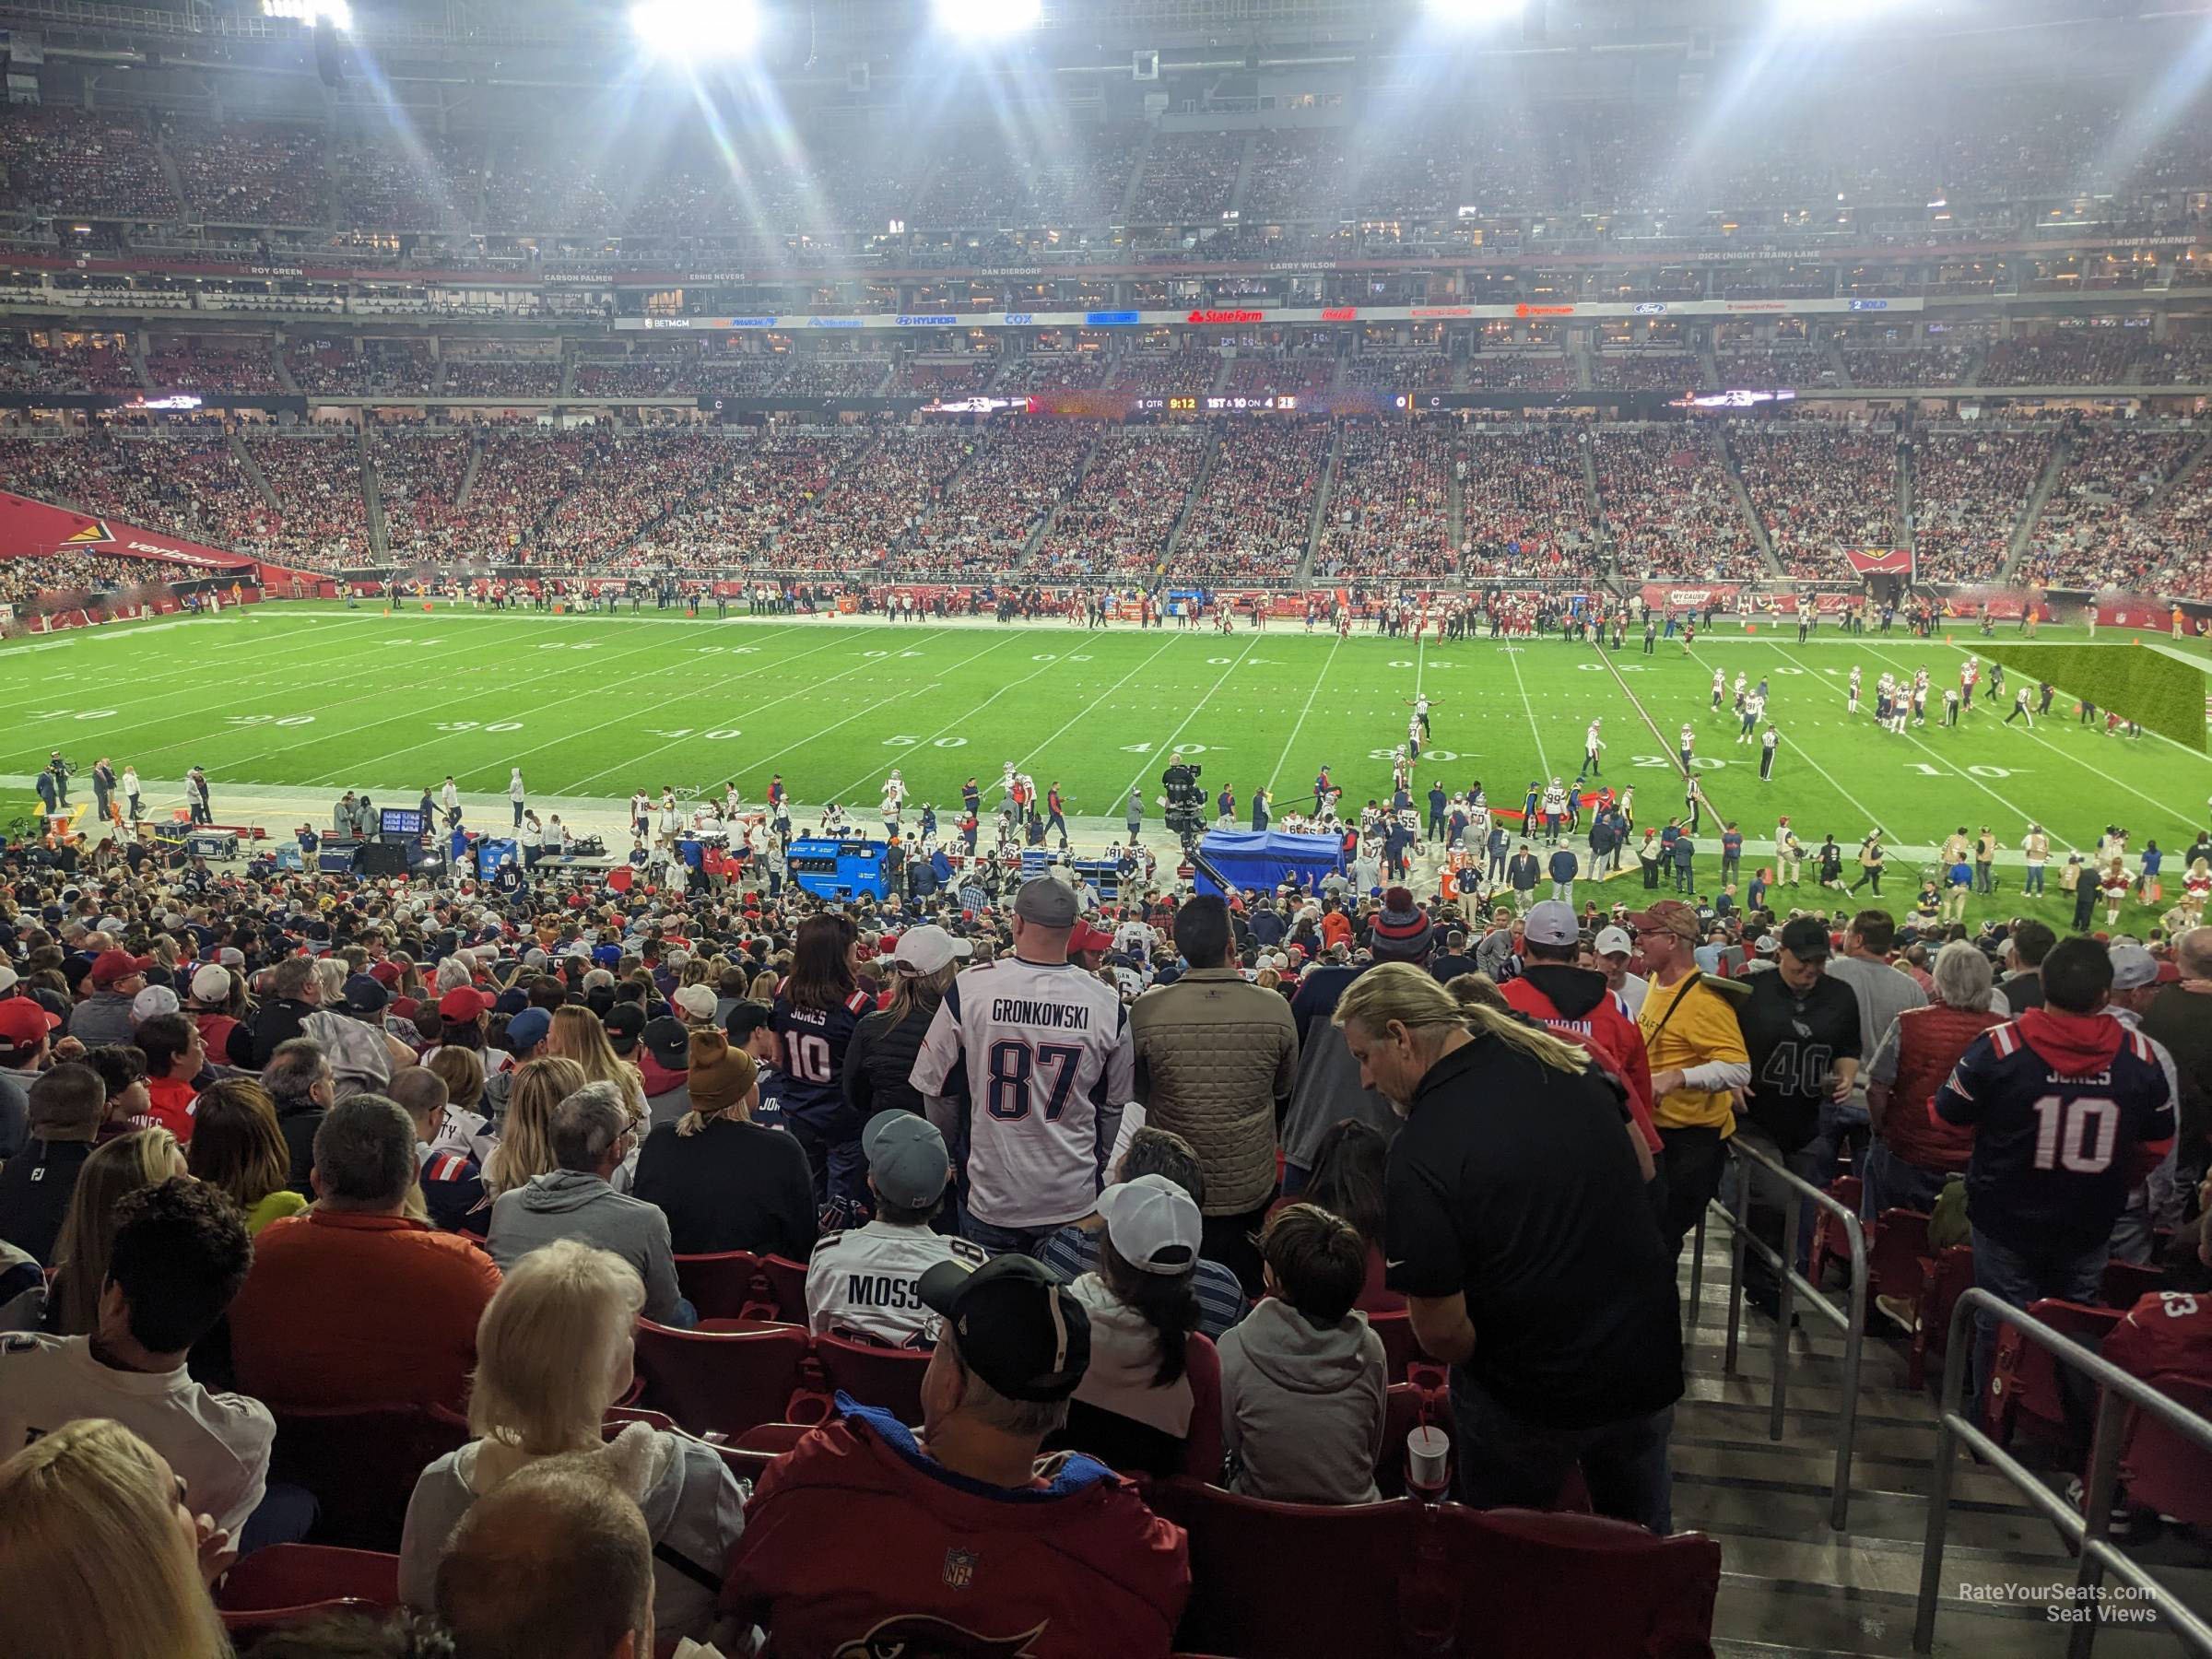 section 128, row 41 seat view  for football - state farm stadium